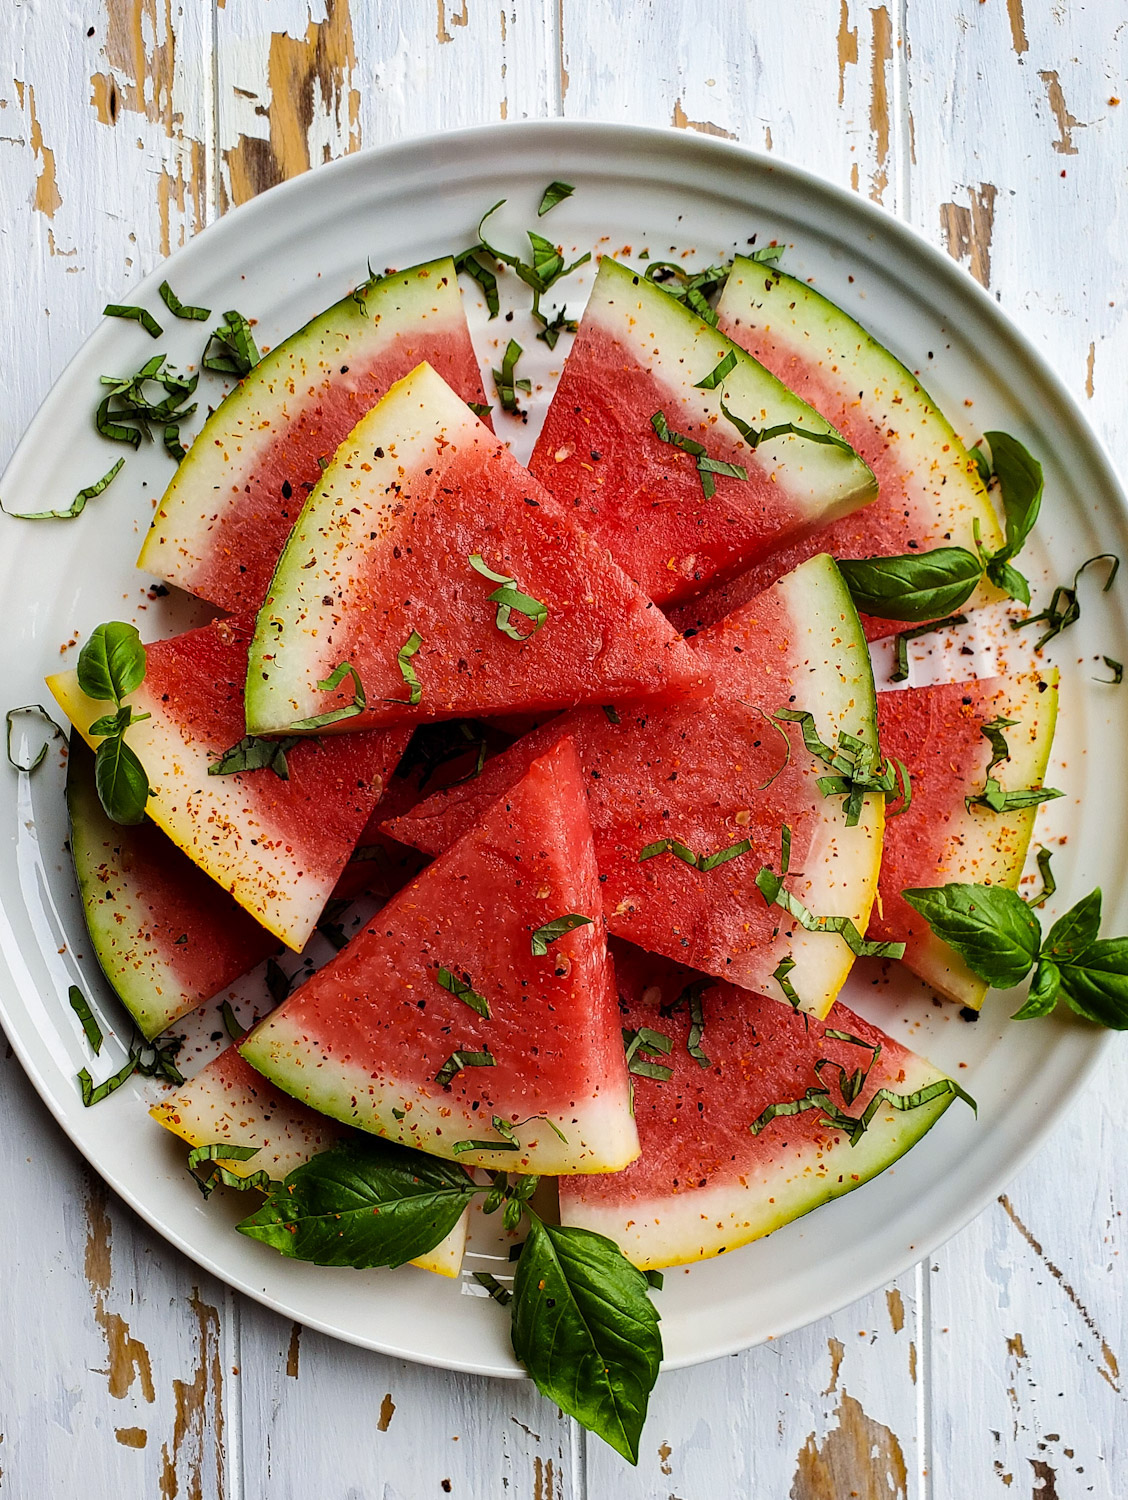 Watermelon, All Dressed Up